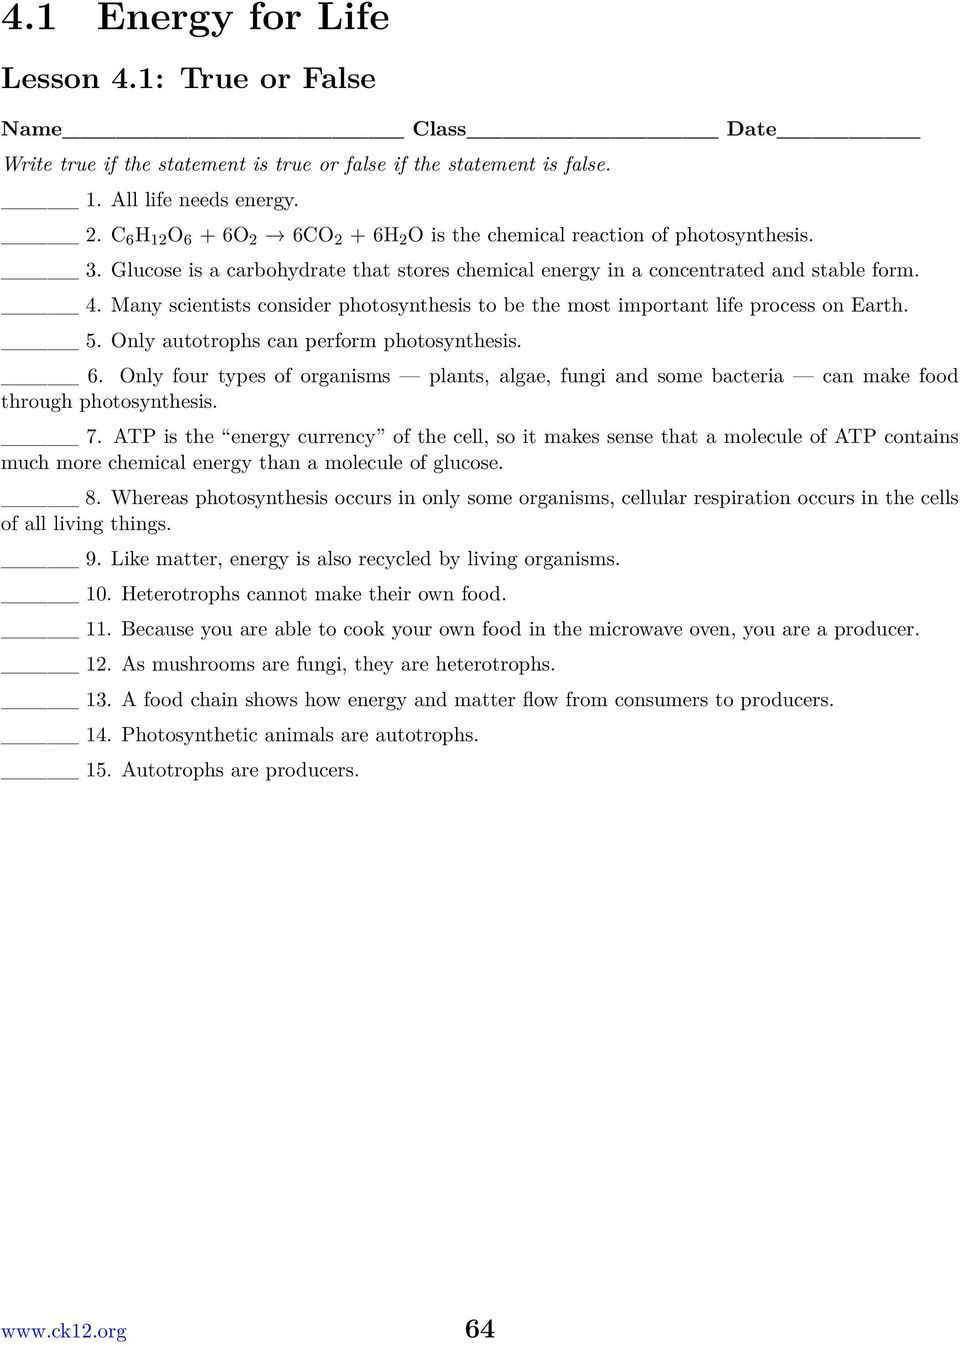 Chapter 4 Photosynthesis And Cellular Respiration Worksheets Pdf Free Download